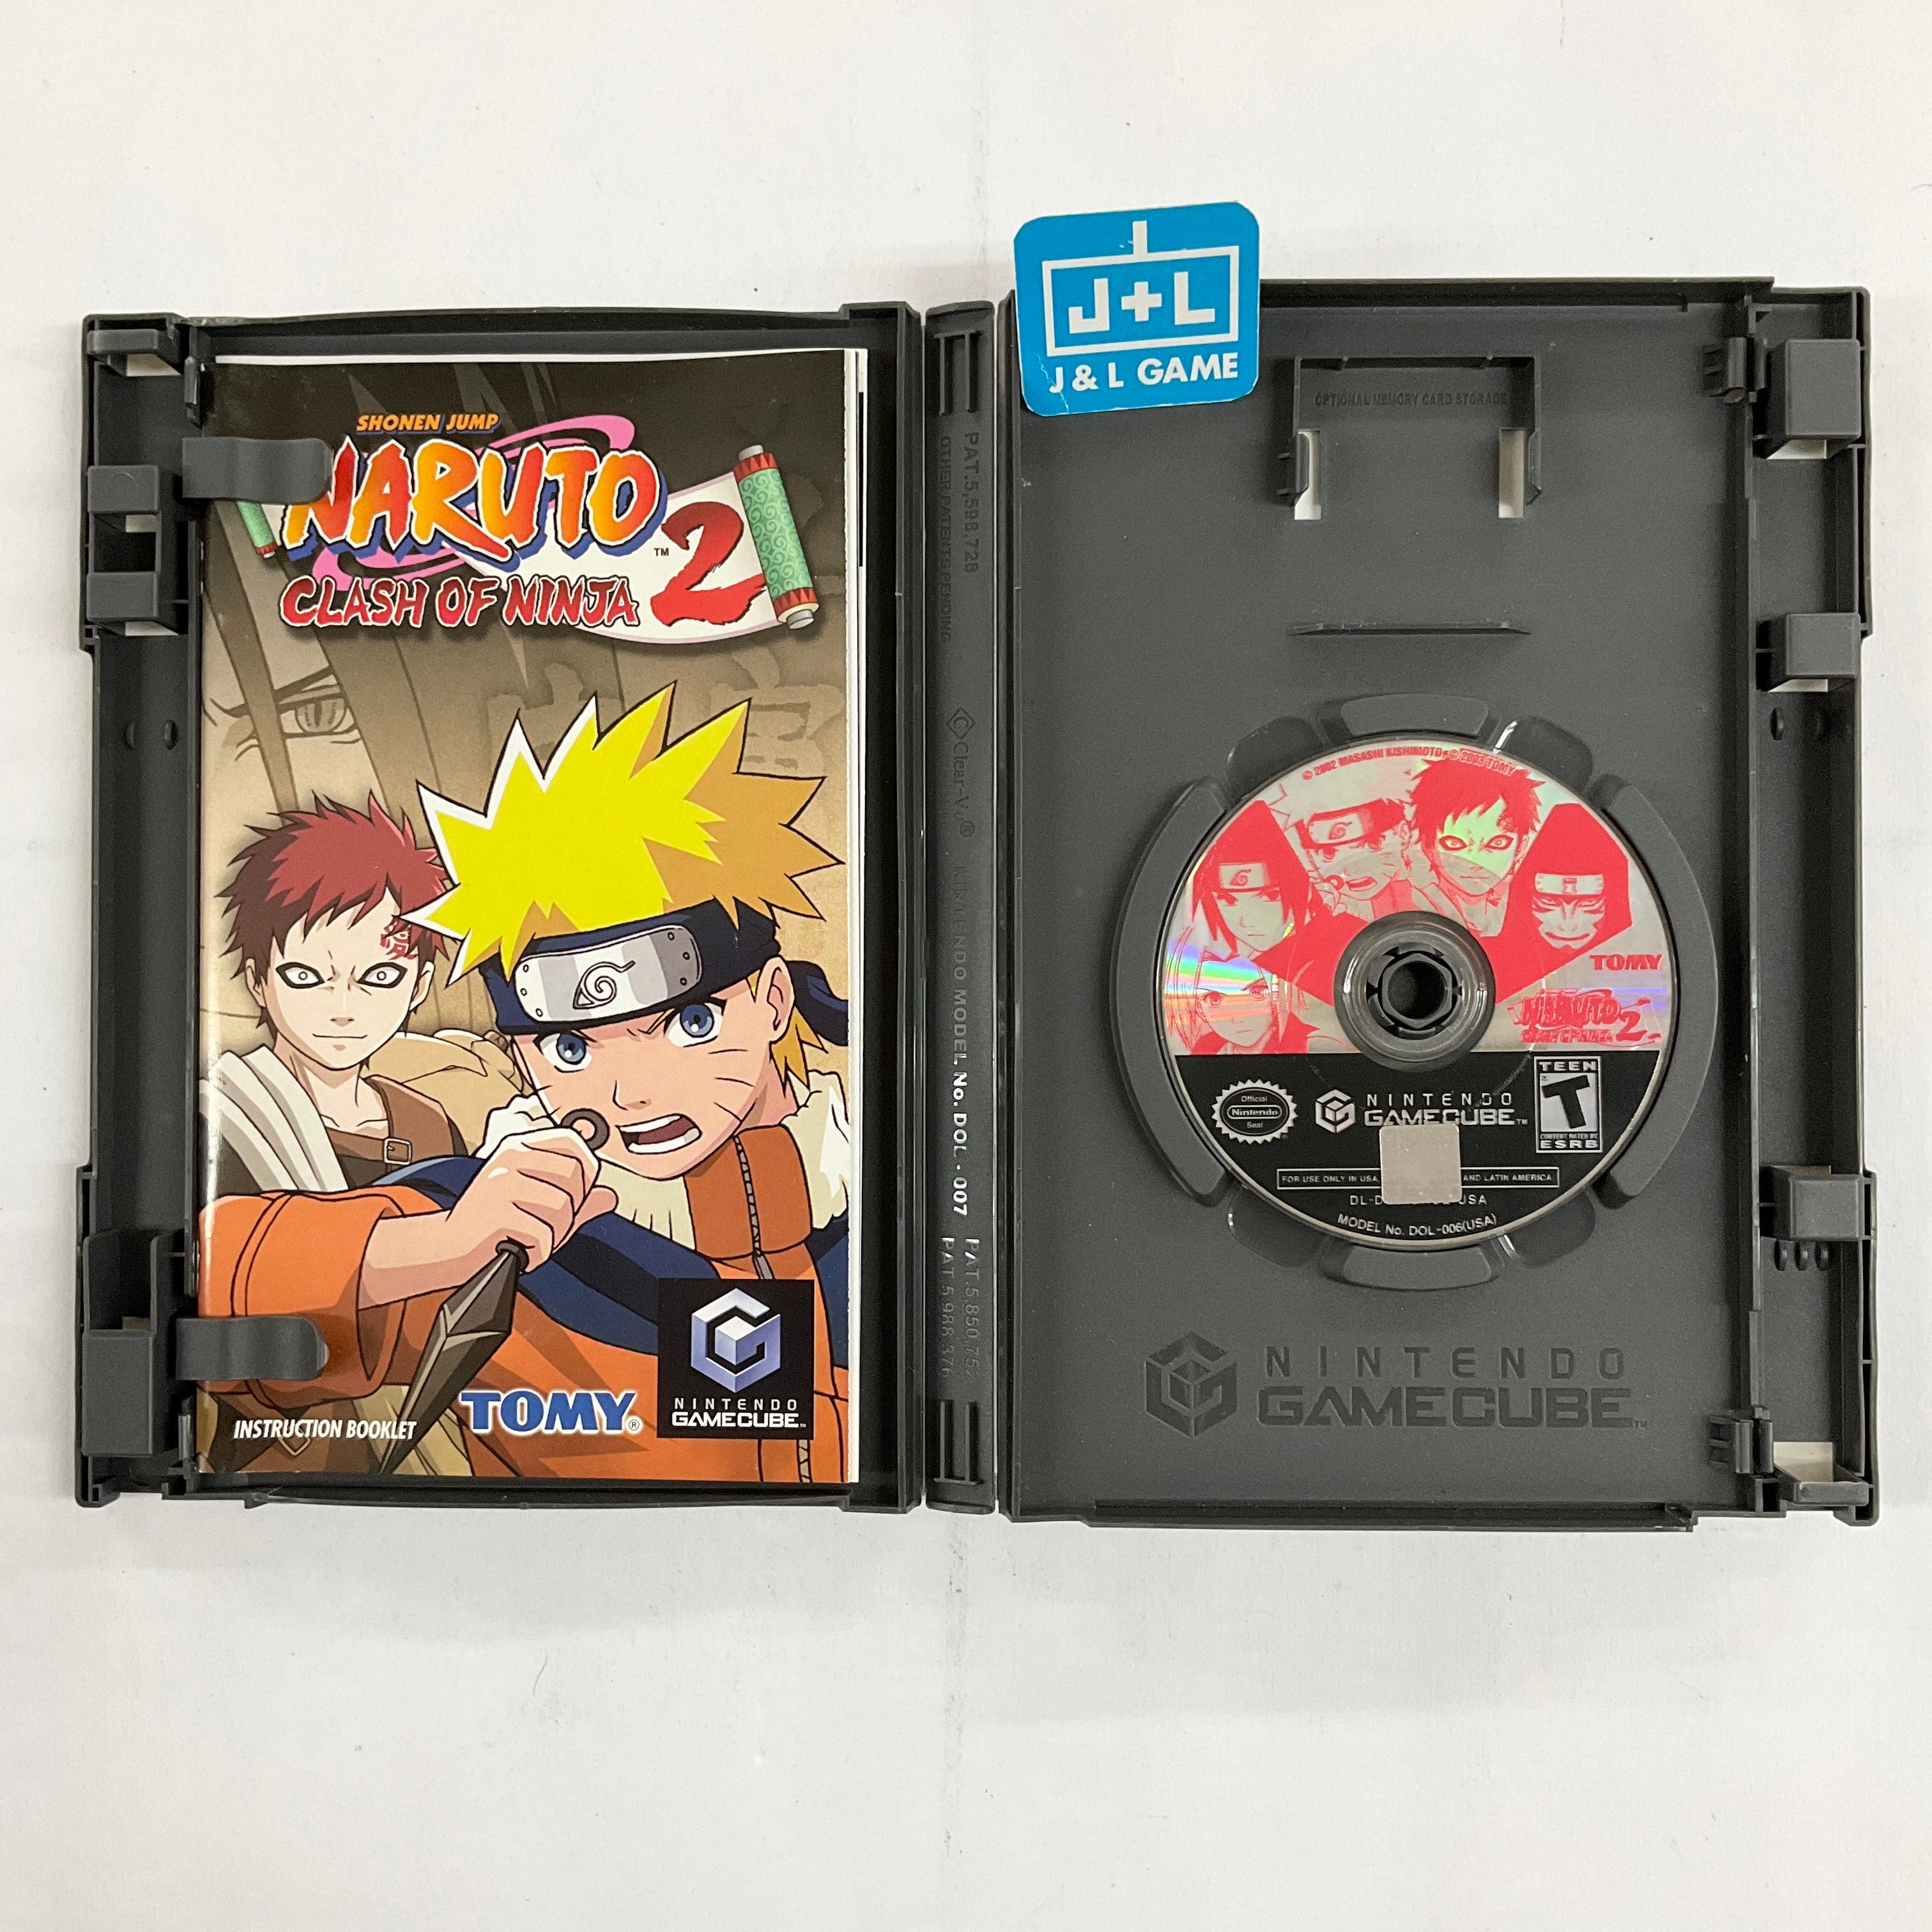 Naruto: Clash of Ninja 2 (Player's Choice) - (GC) GameCube [Pre-Owned] Video Games Tomy Corporation   